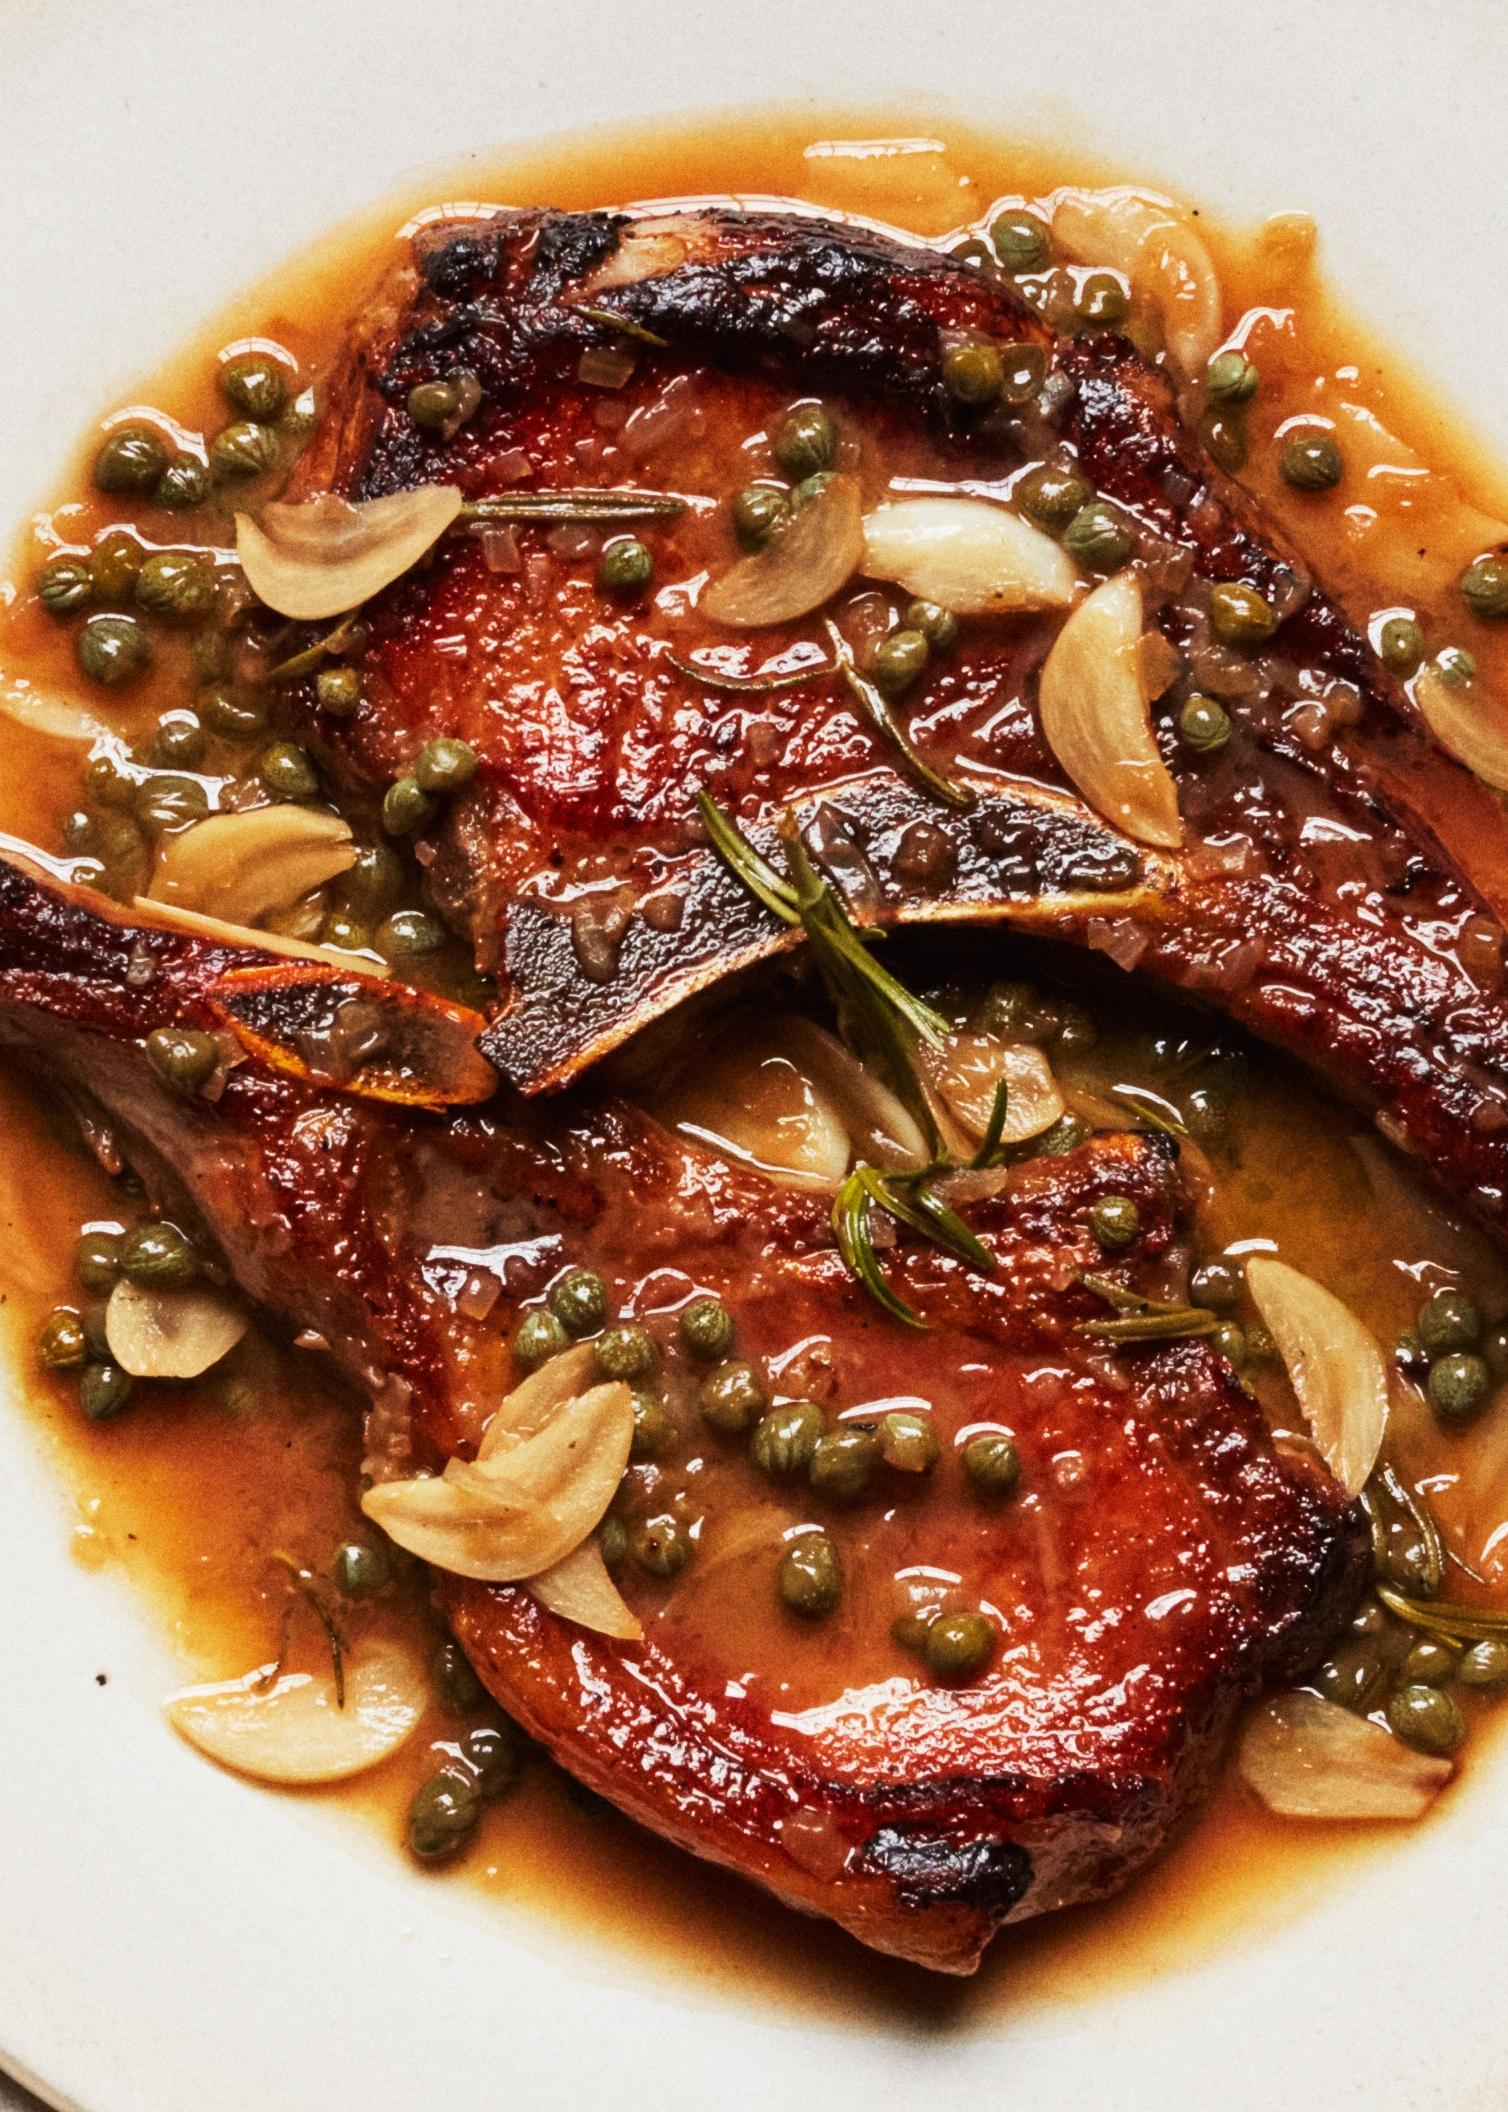  A glass of good red wine is the perfect pairing for this exquisite pork dish.